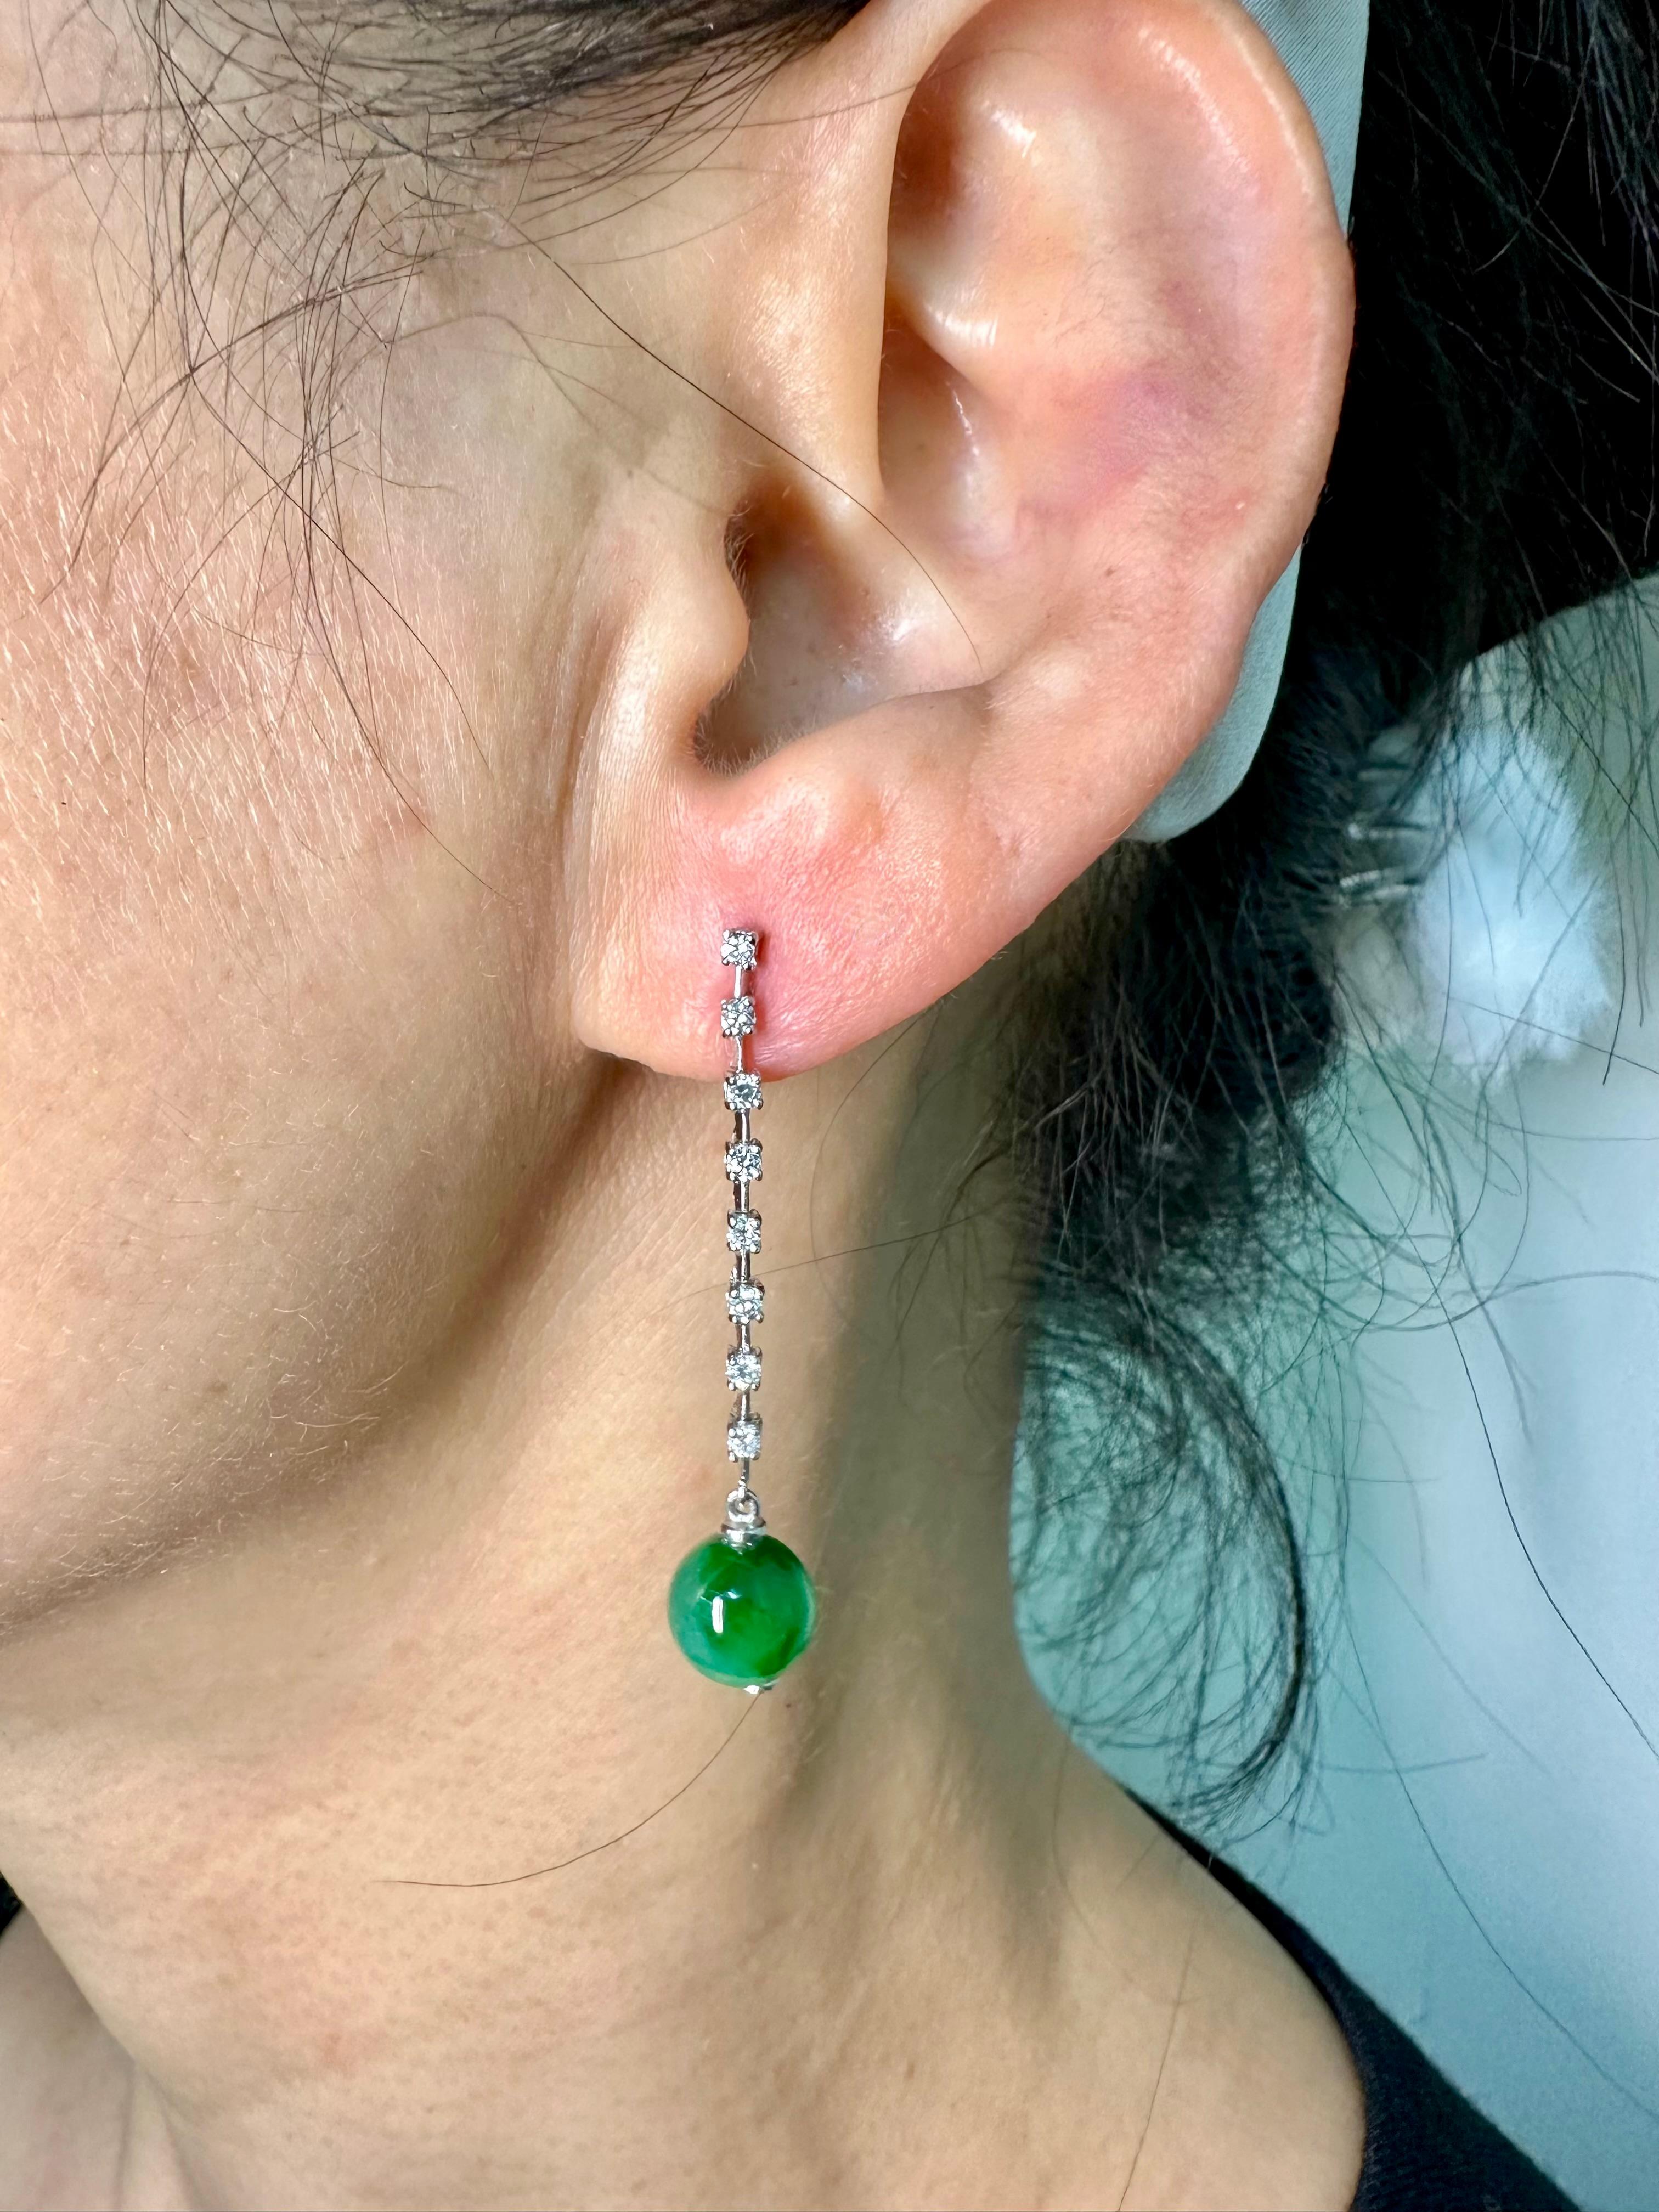 Please check out the HD video. This is a very special pair of drop earrings, the jade beads have a special glow to them that is mesmerizing. The apple and imperial green jade beads are certified to be natural without any treatments. The earrings are